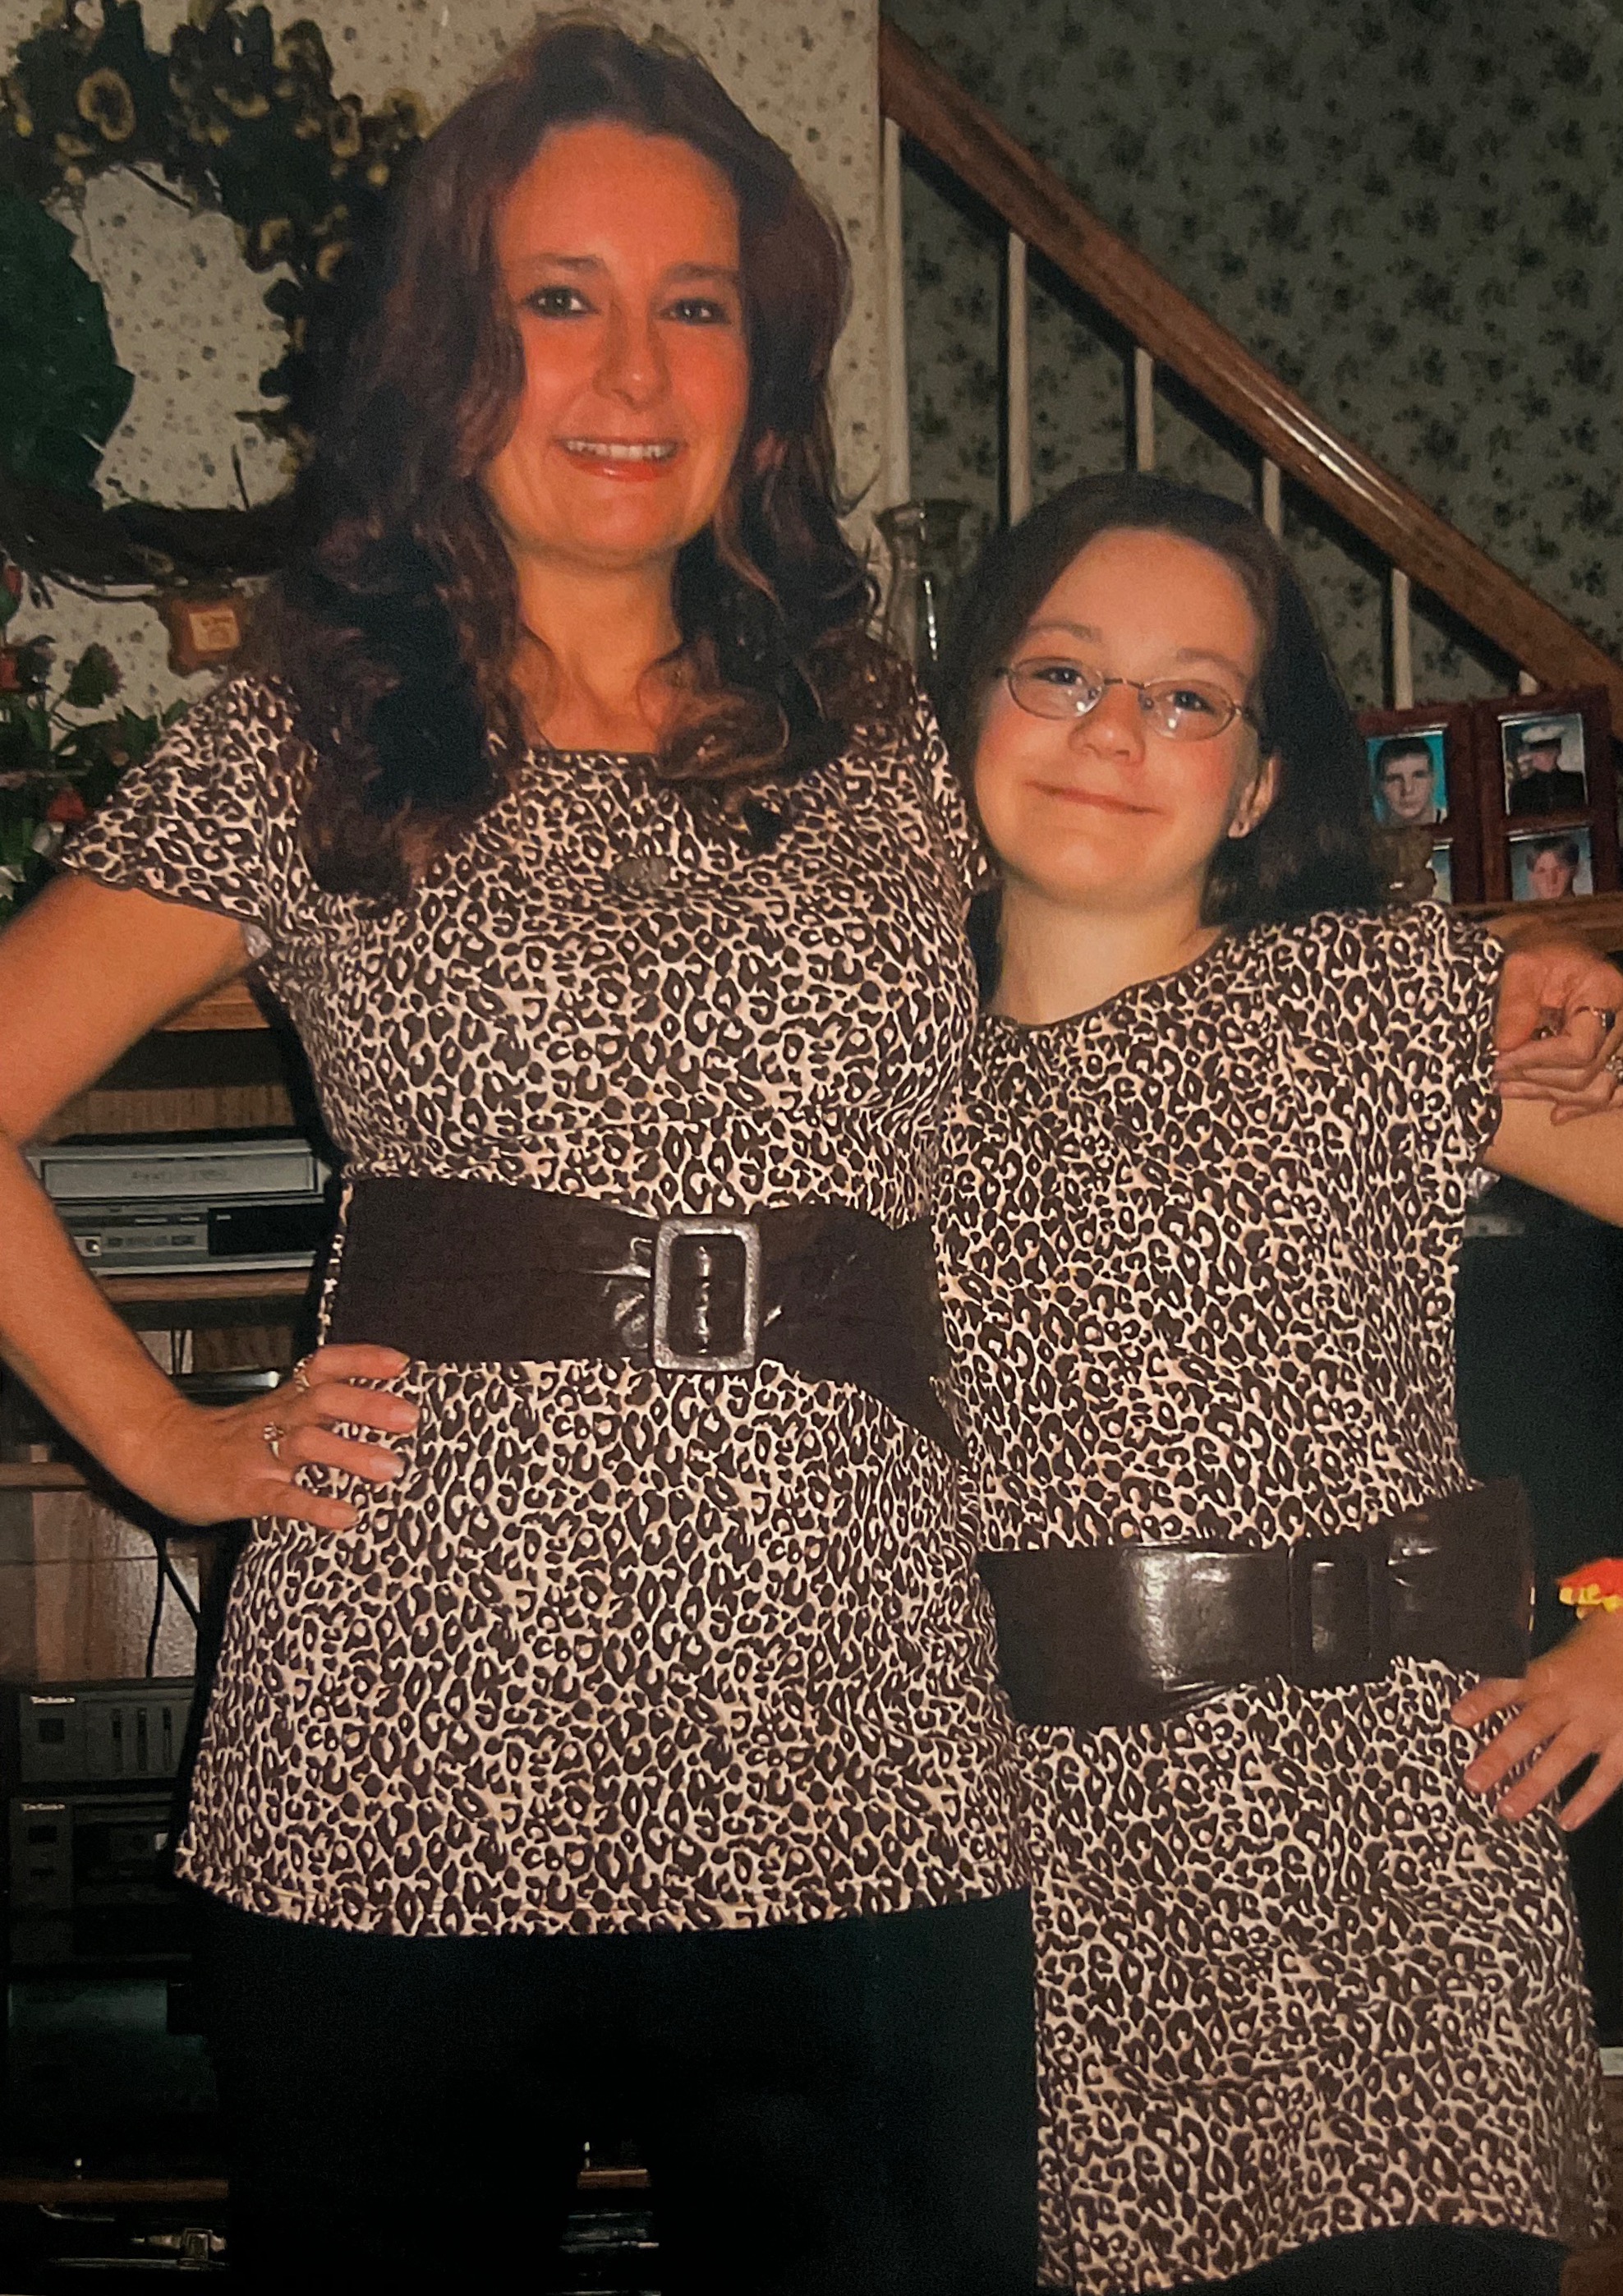 Me and mom in our outfits for the Pat Bennitar concert in 2007